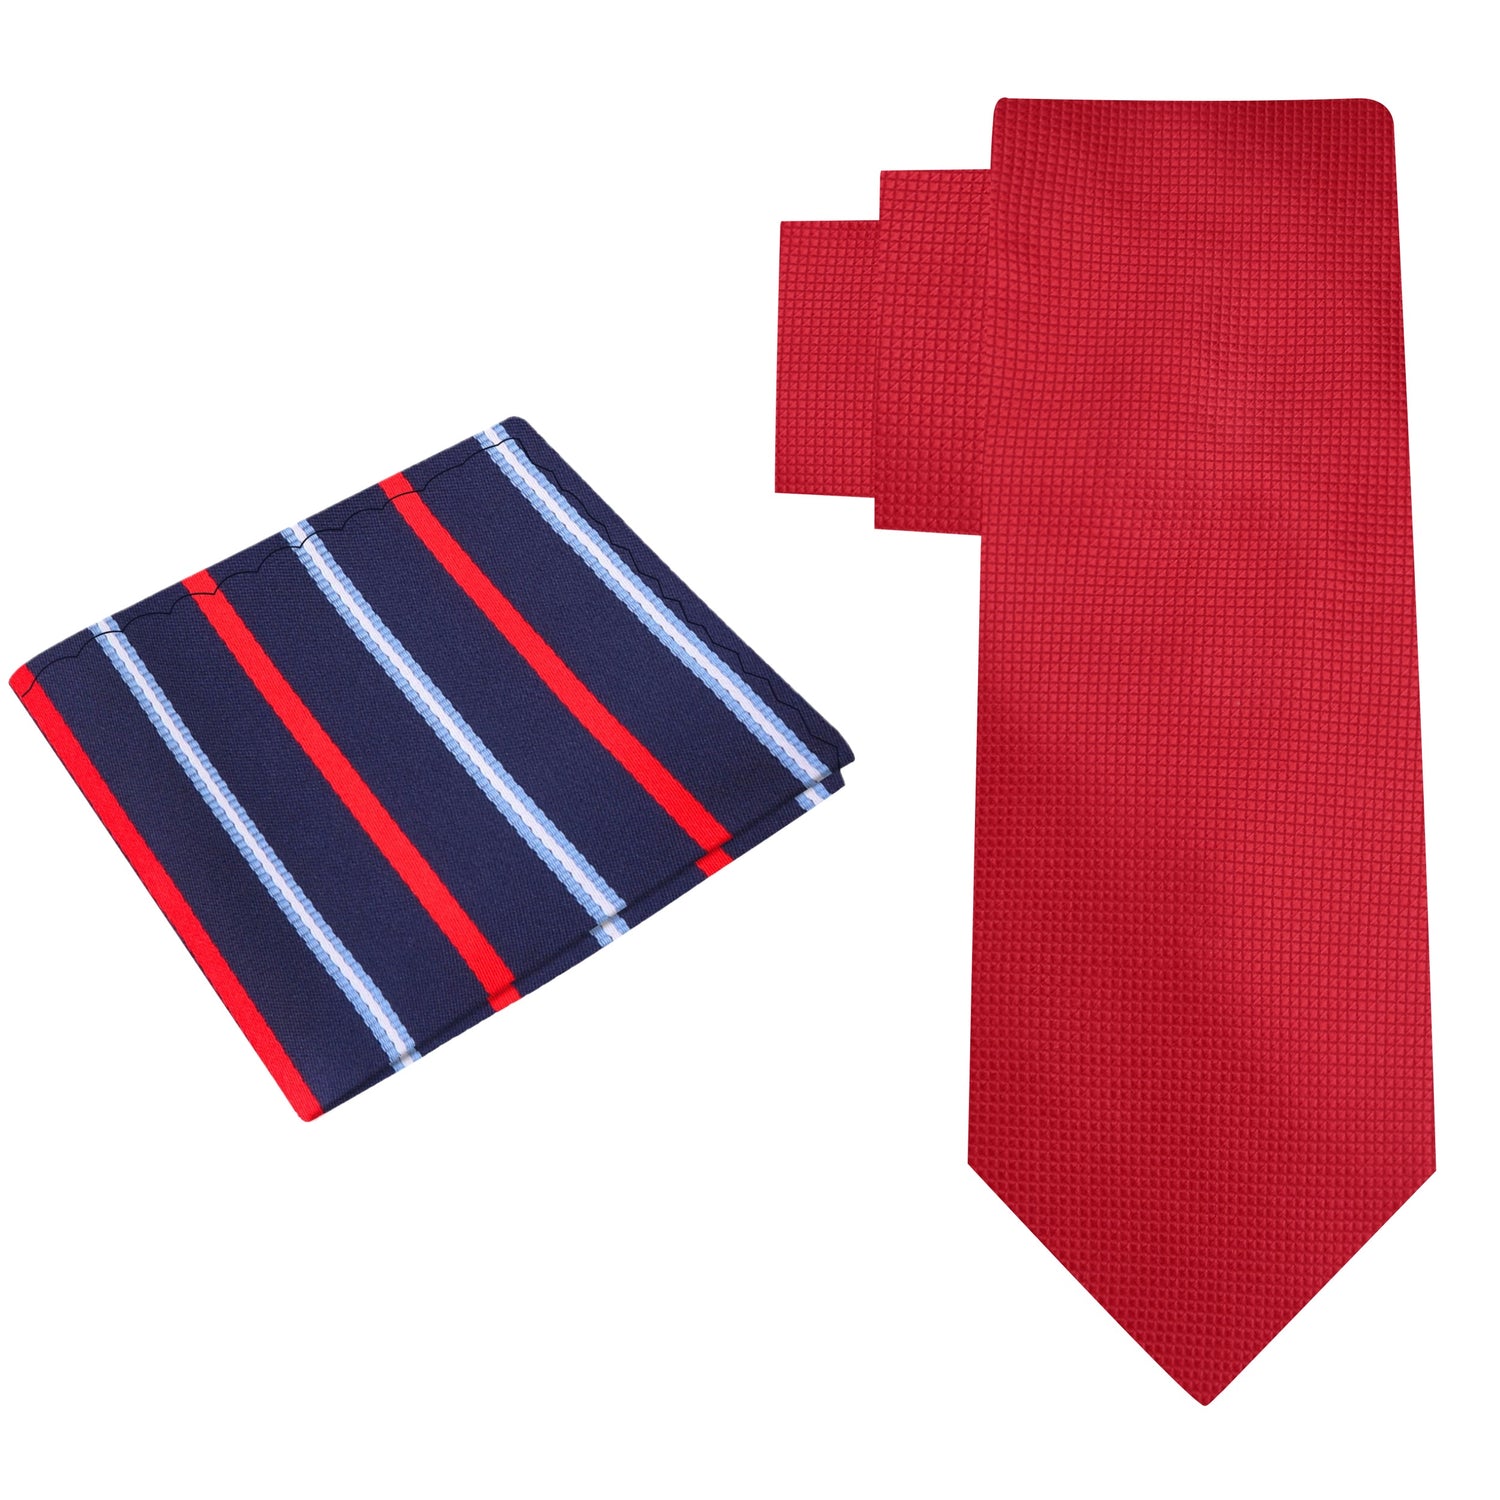 Alt View: Solid Red Necktie with Blue and Red Stripe Pocket Square